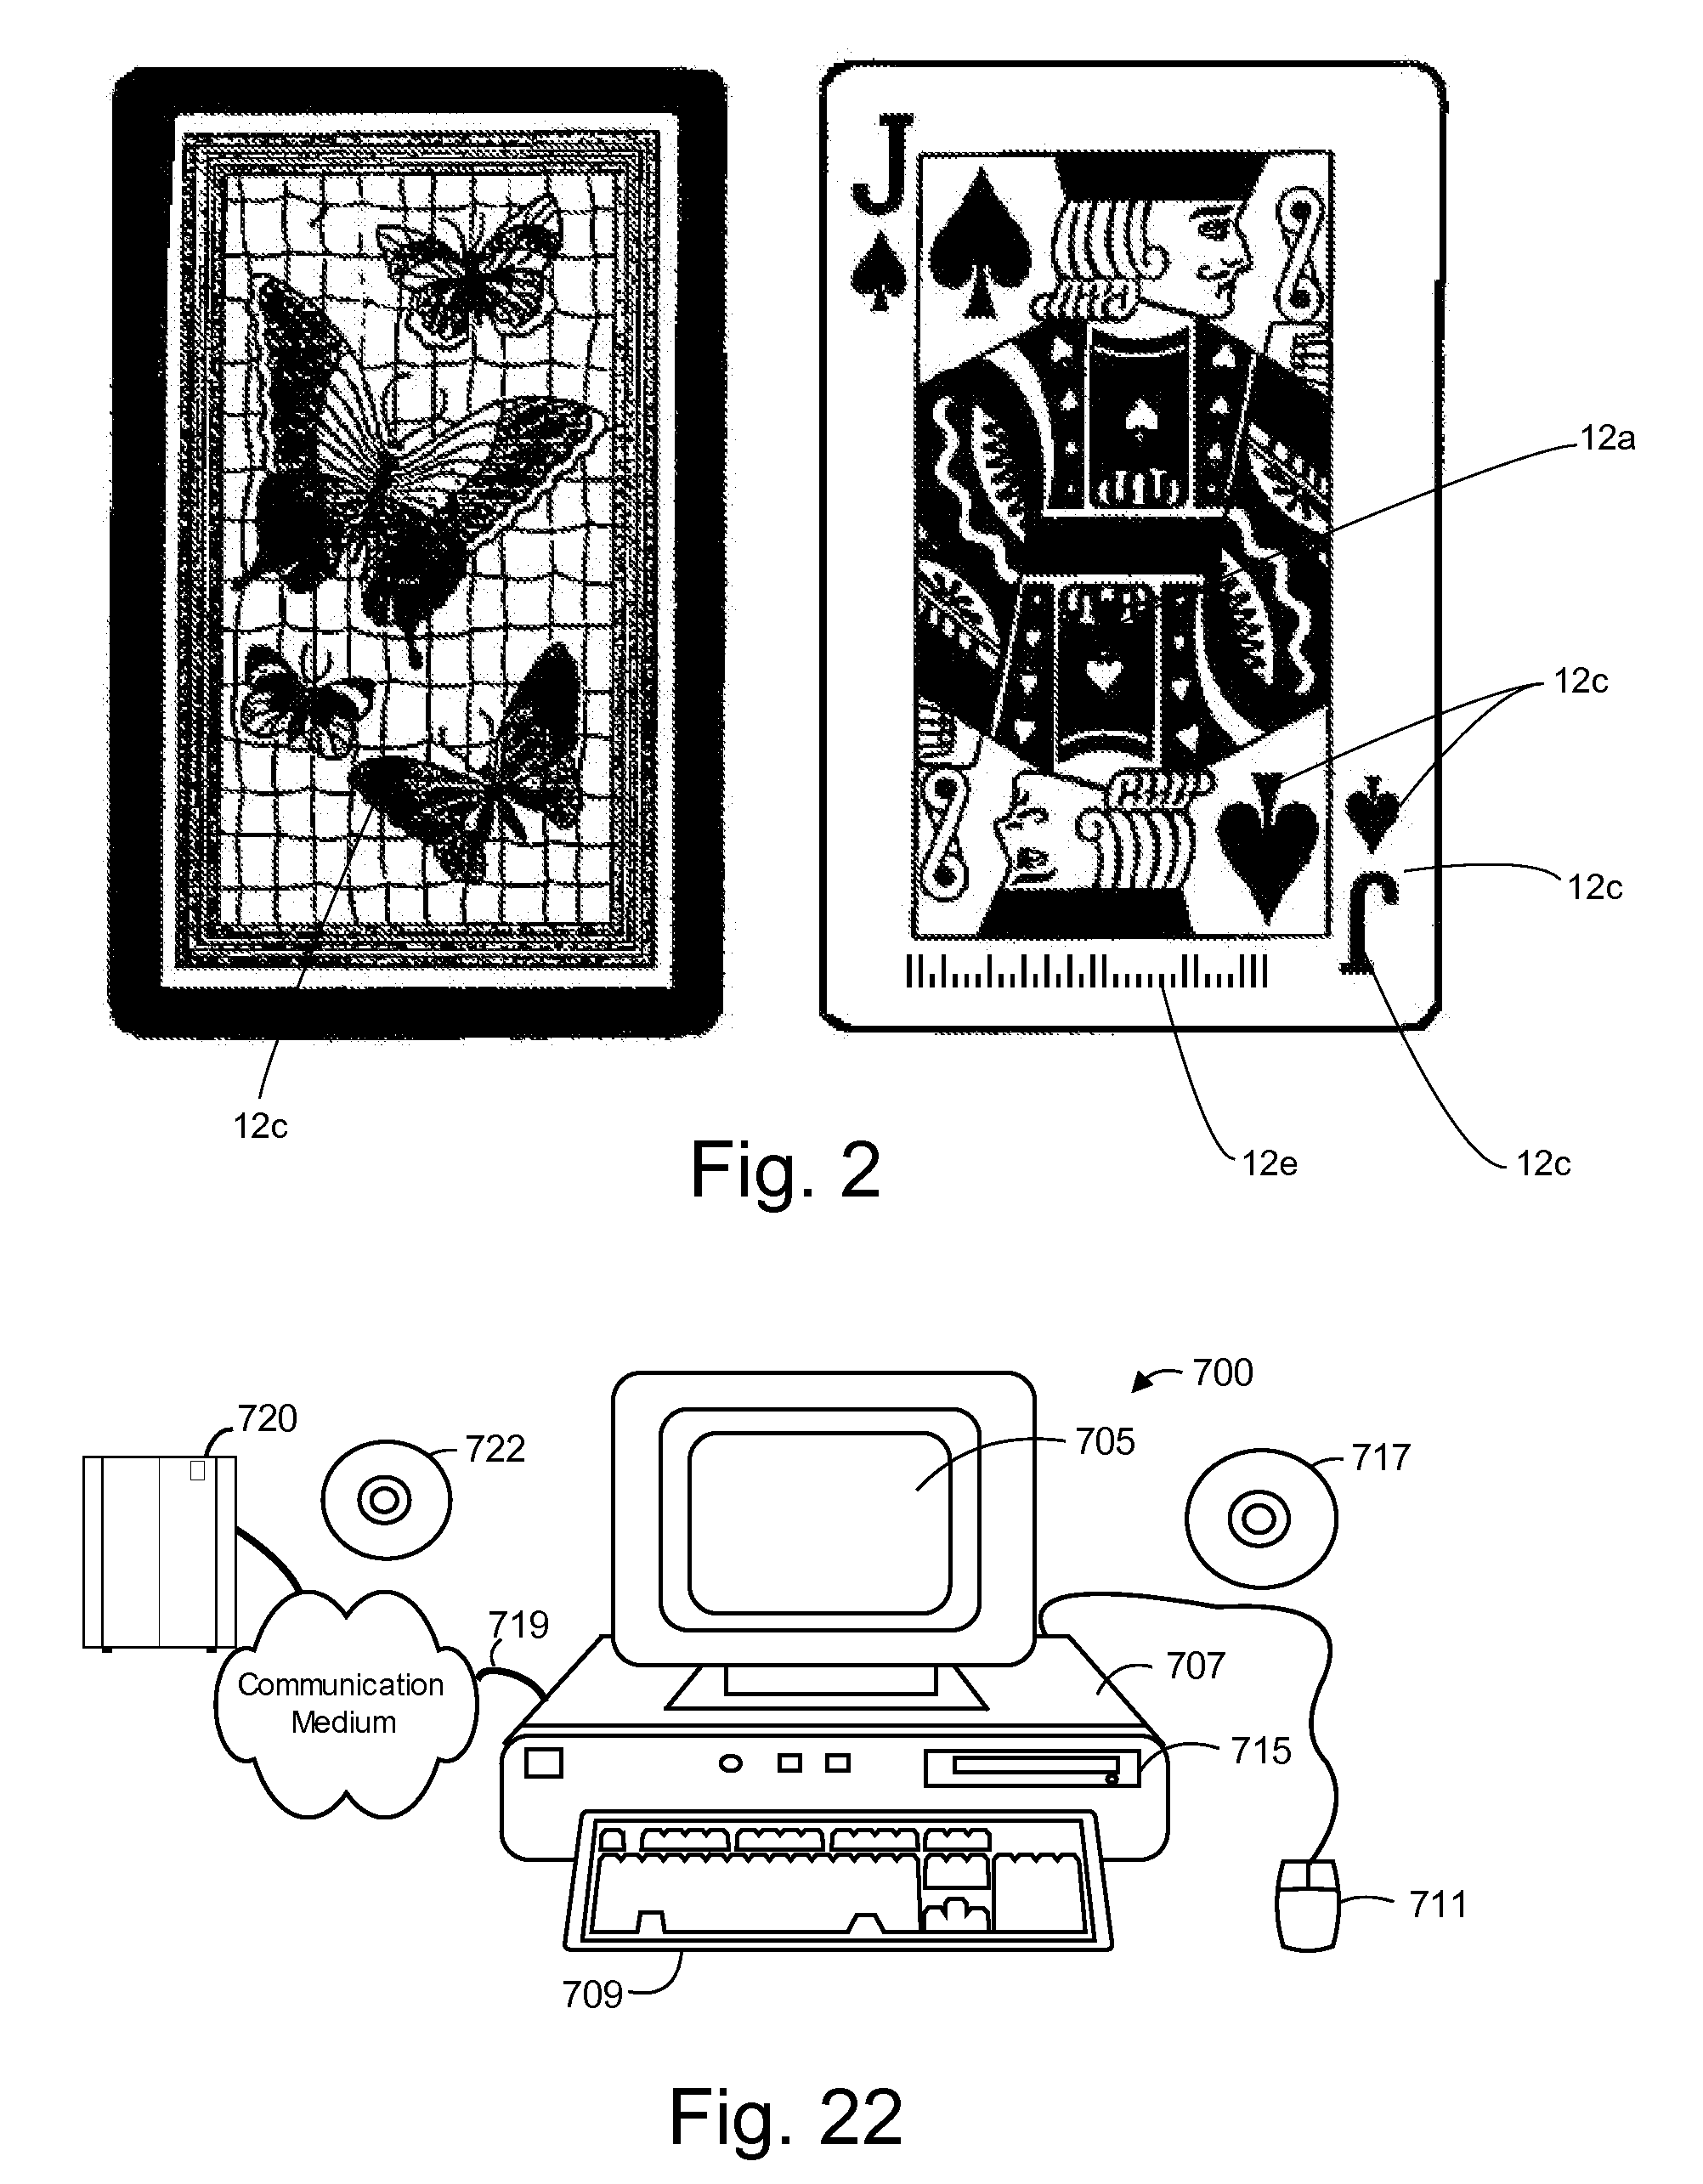 Table with sensors and smart card holder for automated gaming system and gaming cards